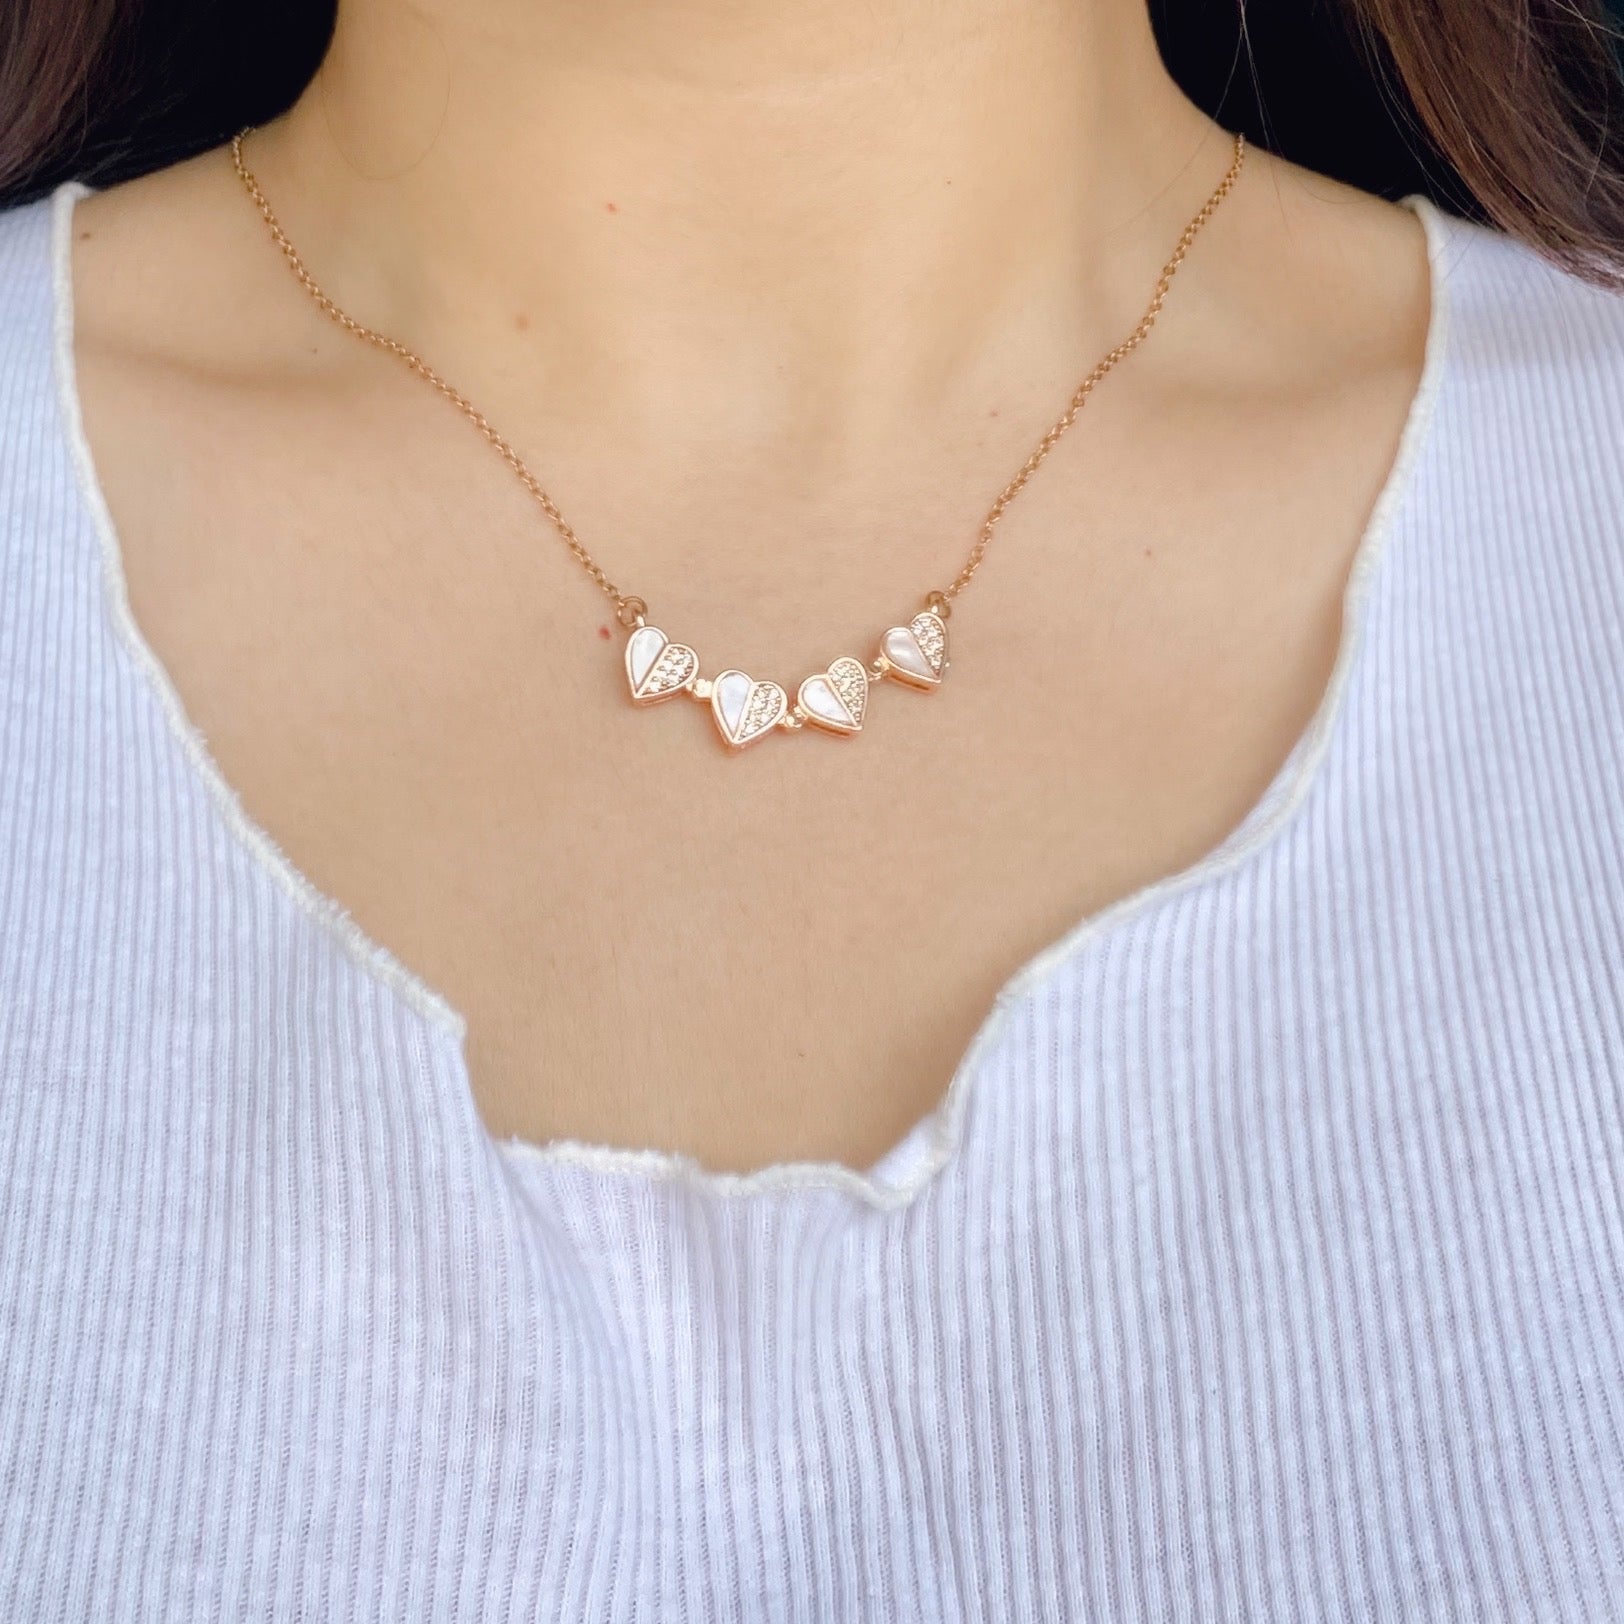 Heart Necklace for Women Girls Cute Four Leaf Clover Necklace Dainty  Necklaces | eBay